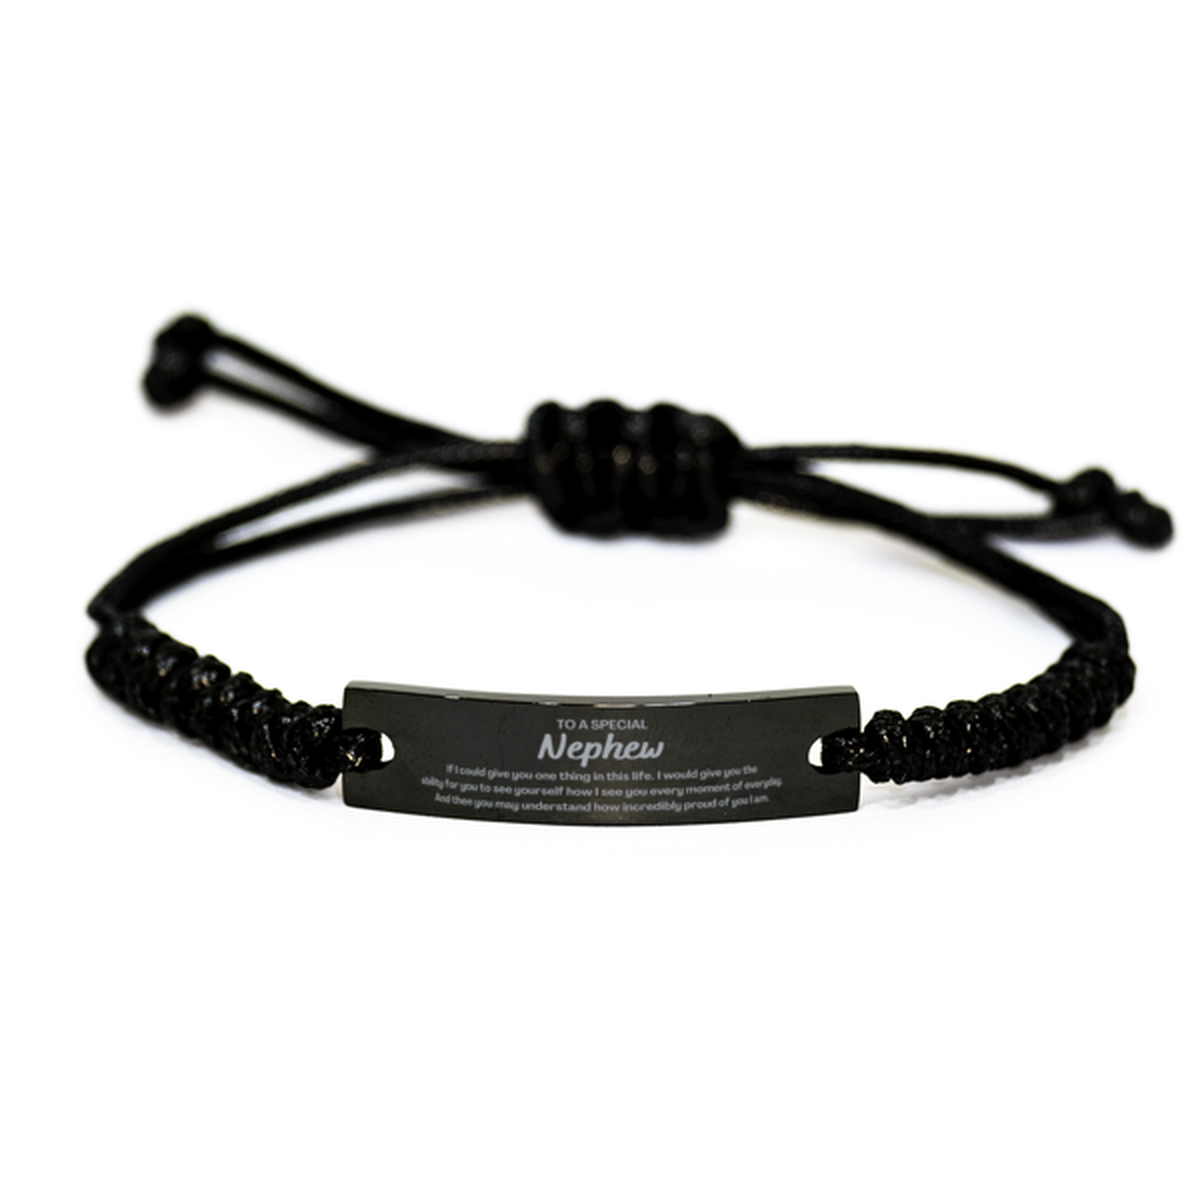 To My Nephew Black Rope Bracelet, Gifts For Nephew Engraved, Inspirational Gifts for Christmas Birthday, Epic Gifts for Nephew To A Special Nephew how incredibly proud of you I am